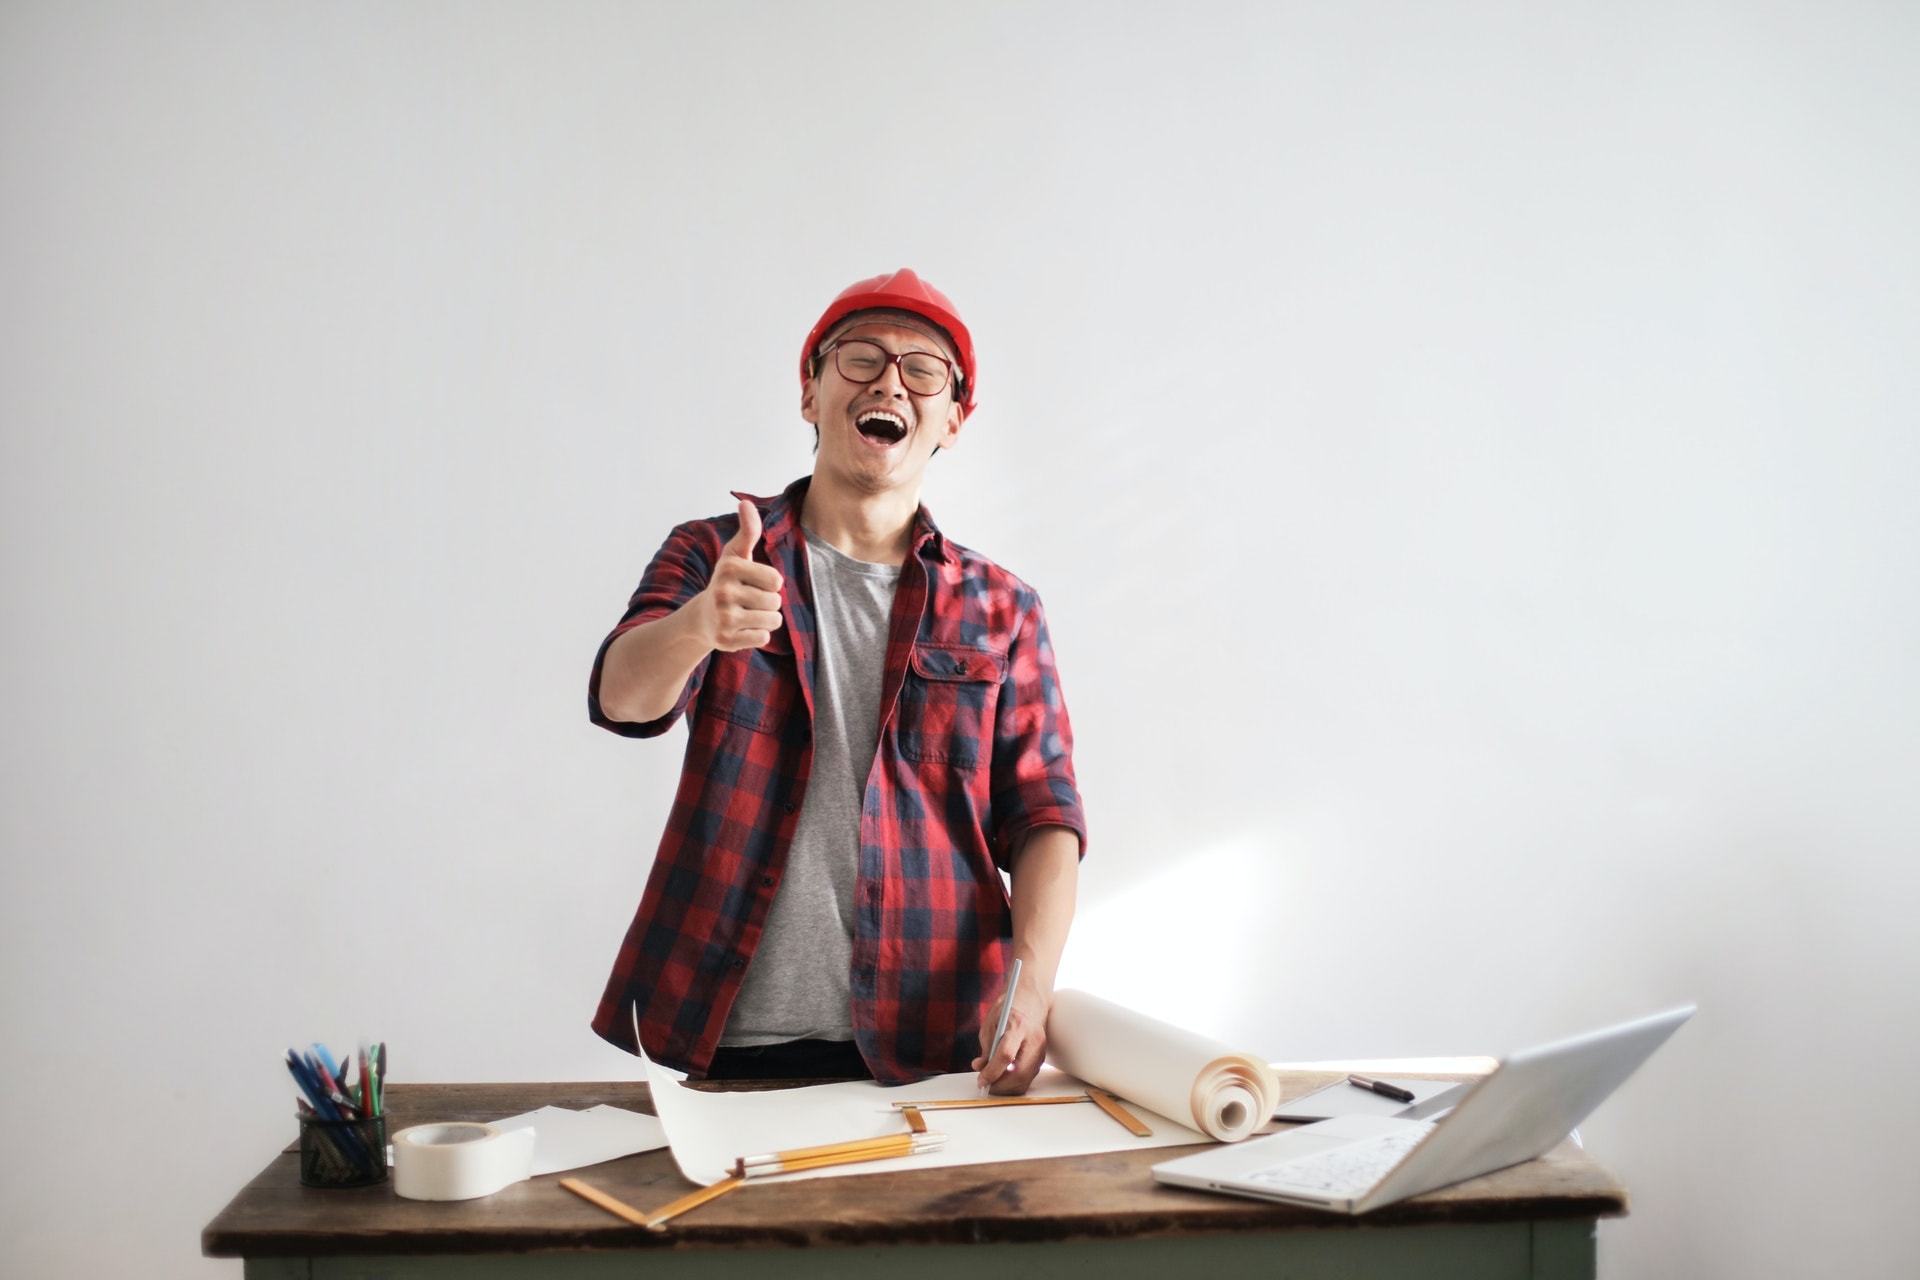 A man standing and working on building plans at a desk, he is wearing a construction helmet, smiling and giving a thumbs up.